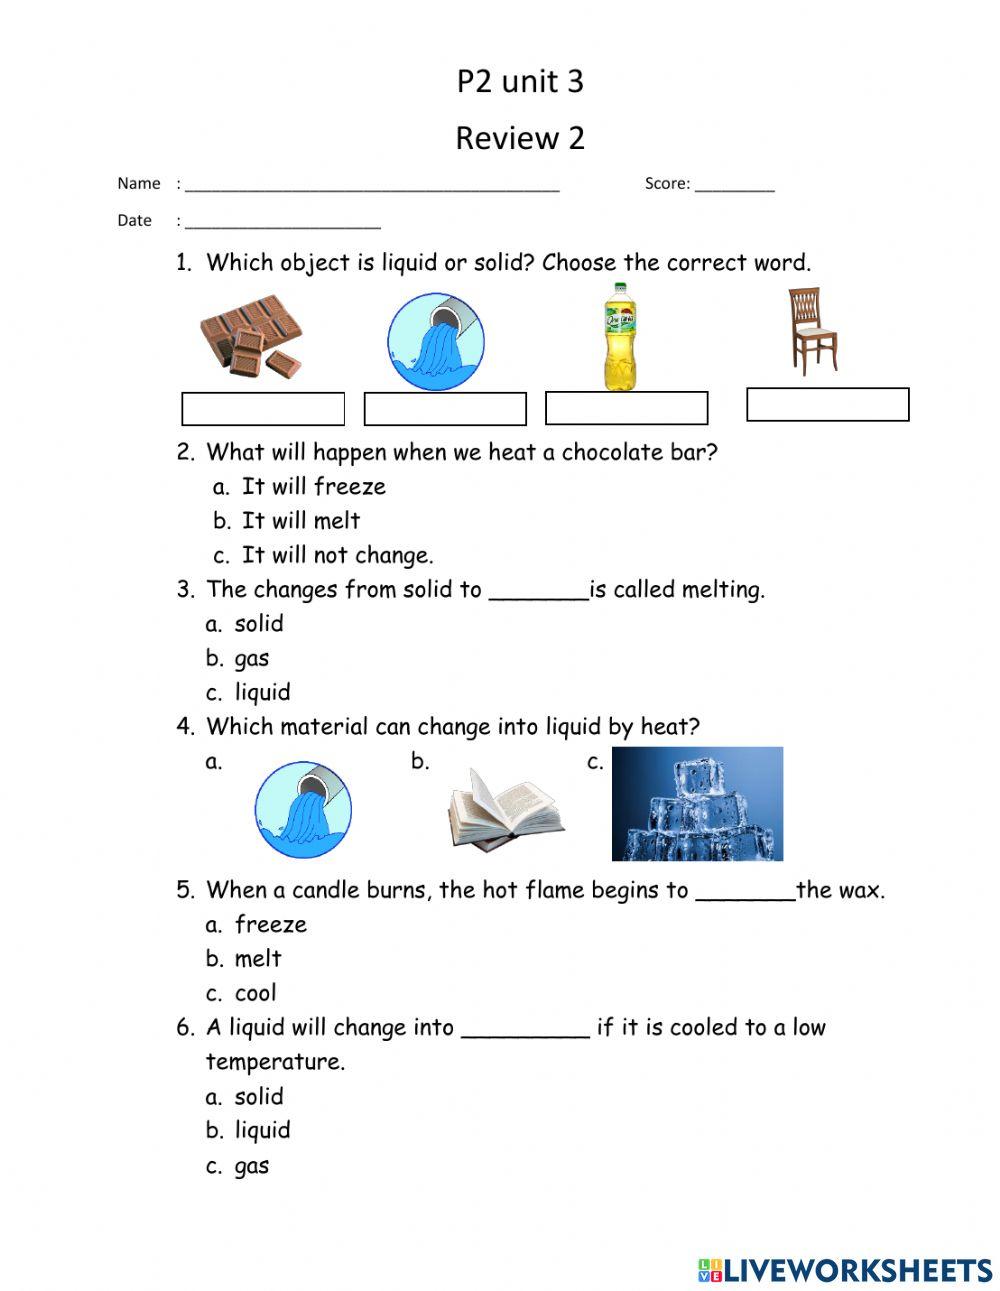 P2 Science Review 2